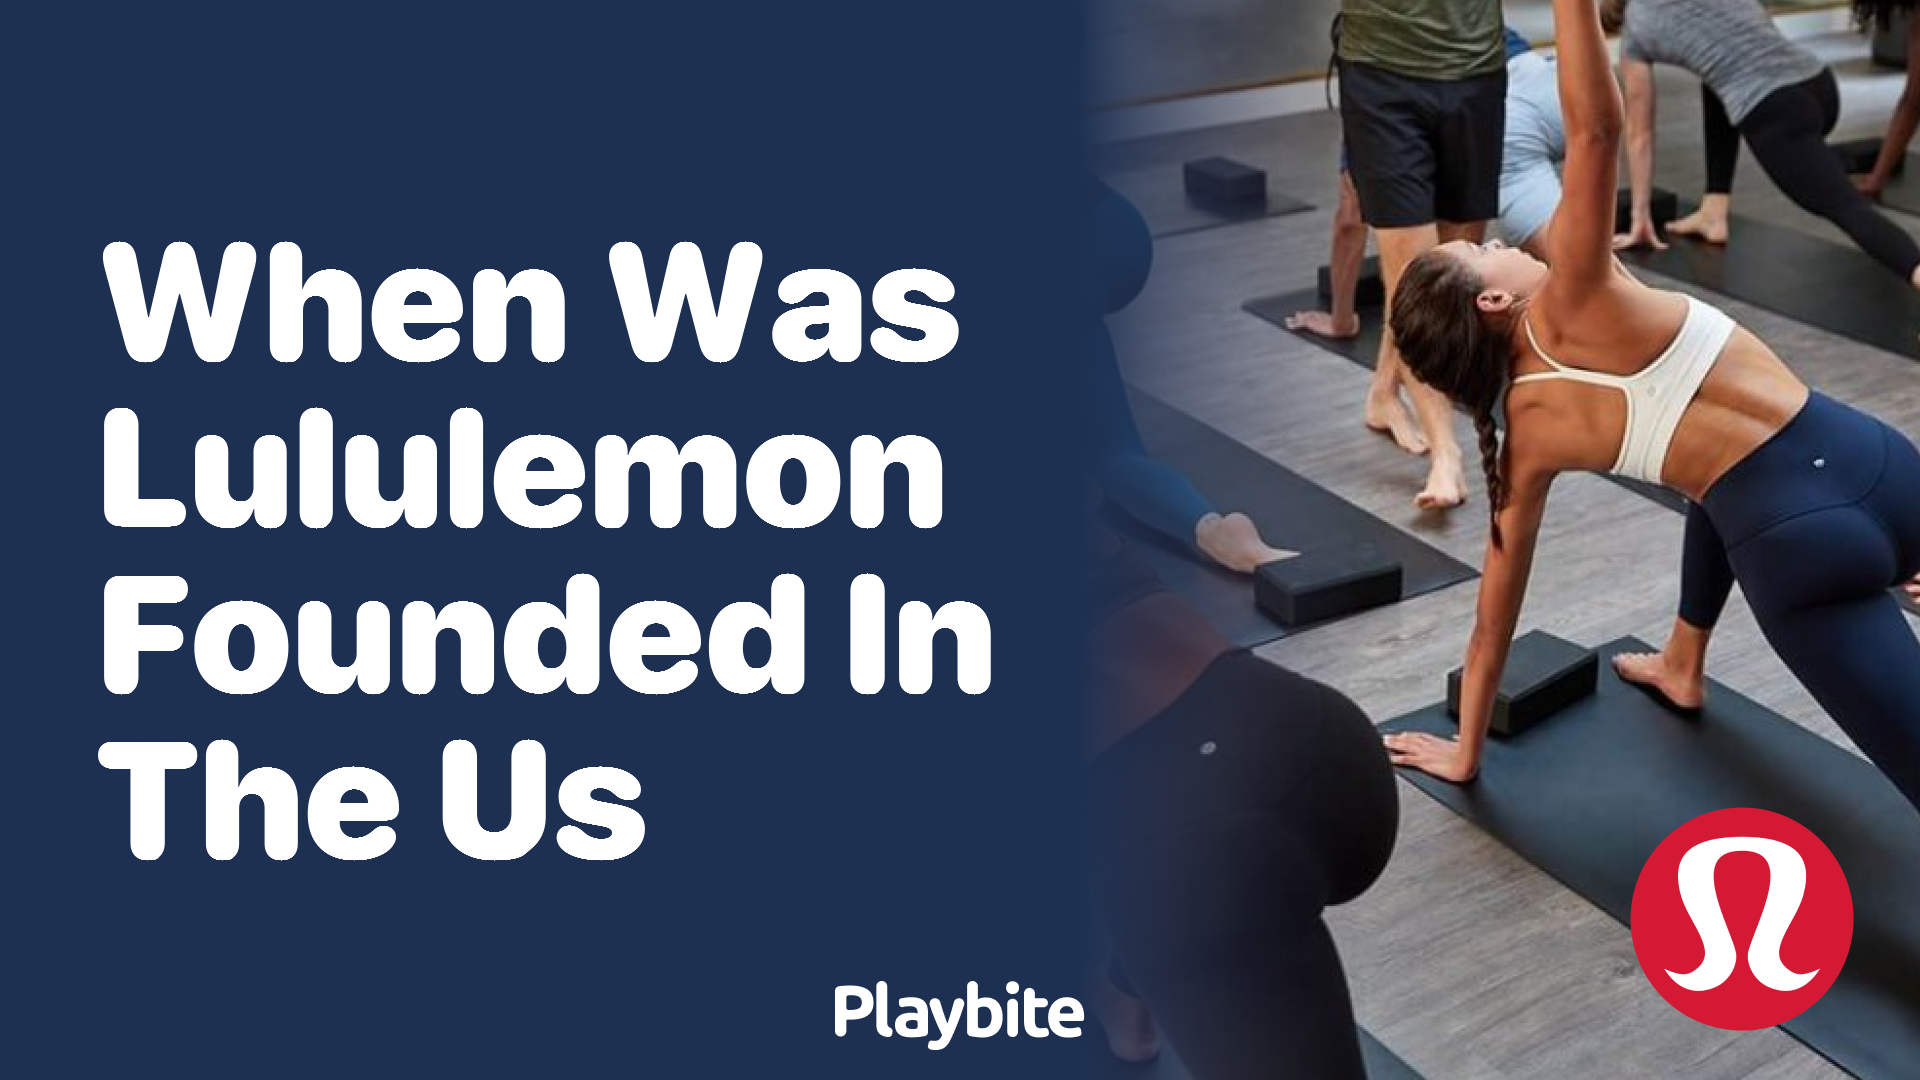 When Was Lululemon Founded in the US? - Playbite